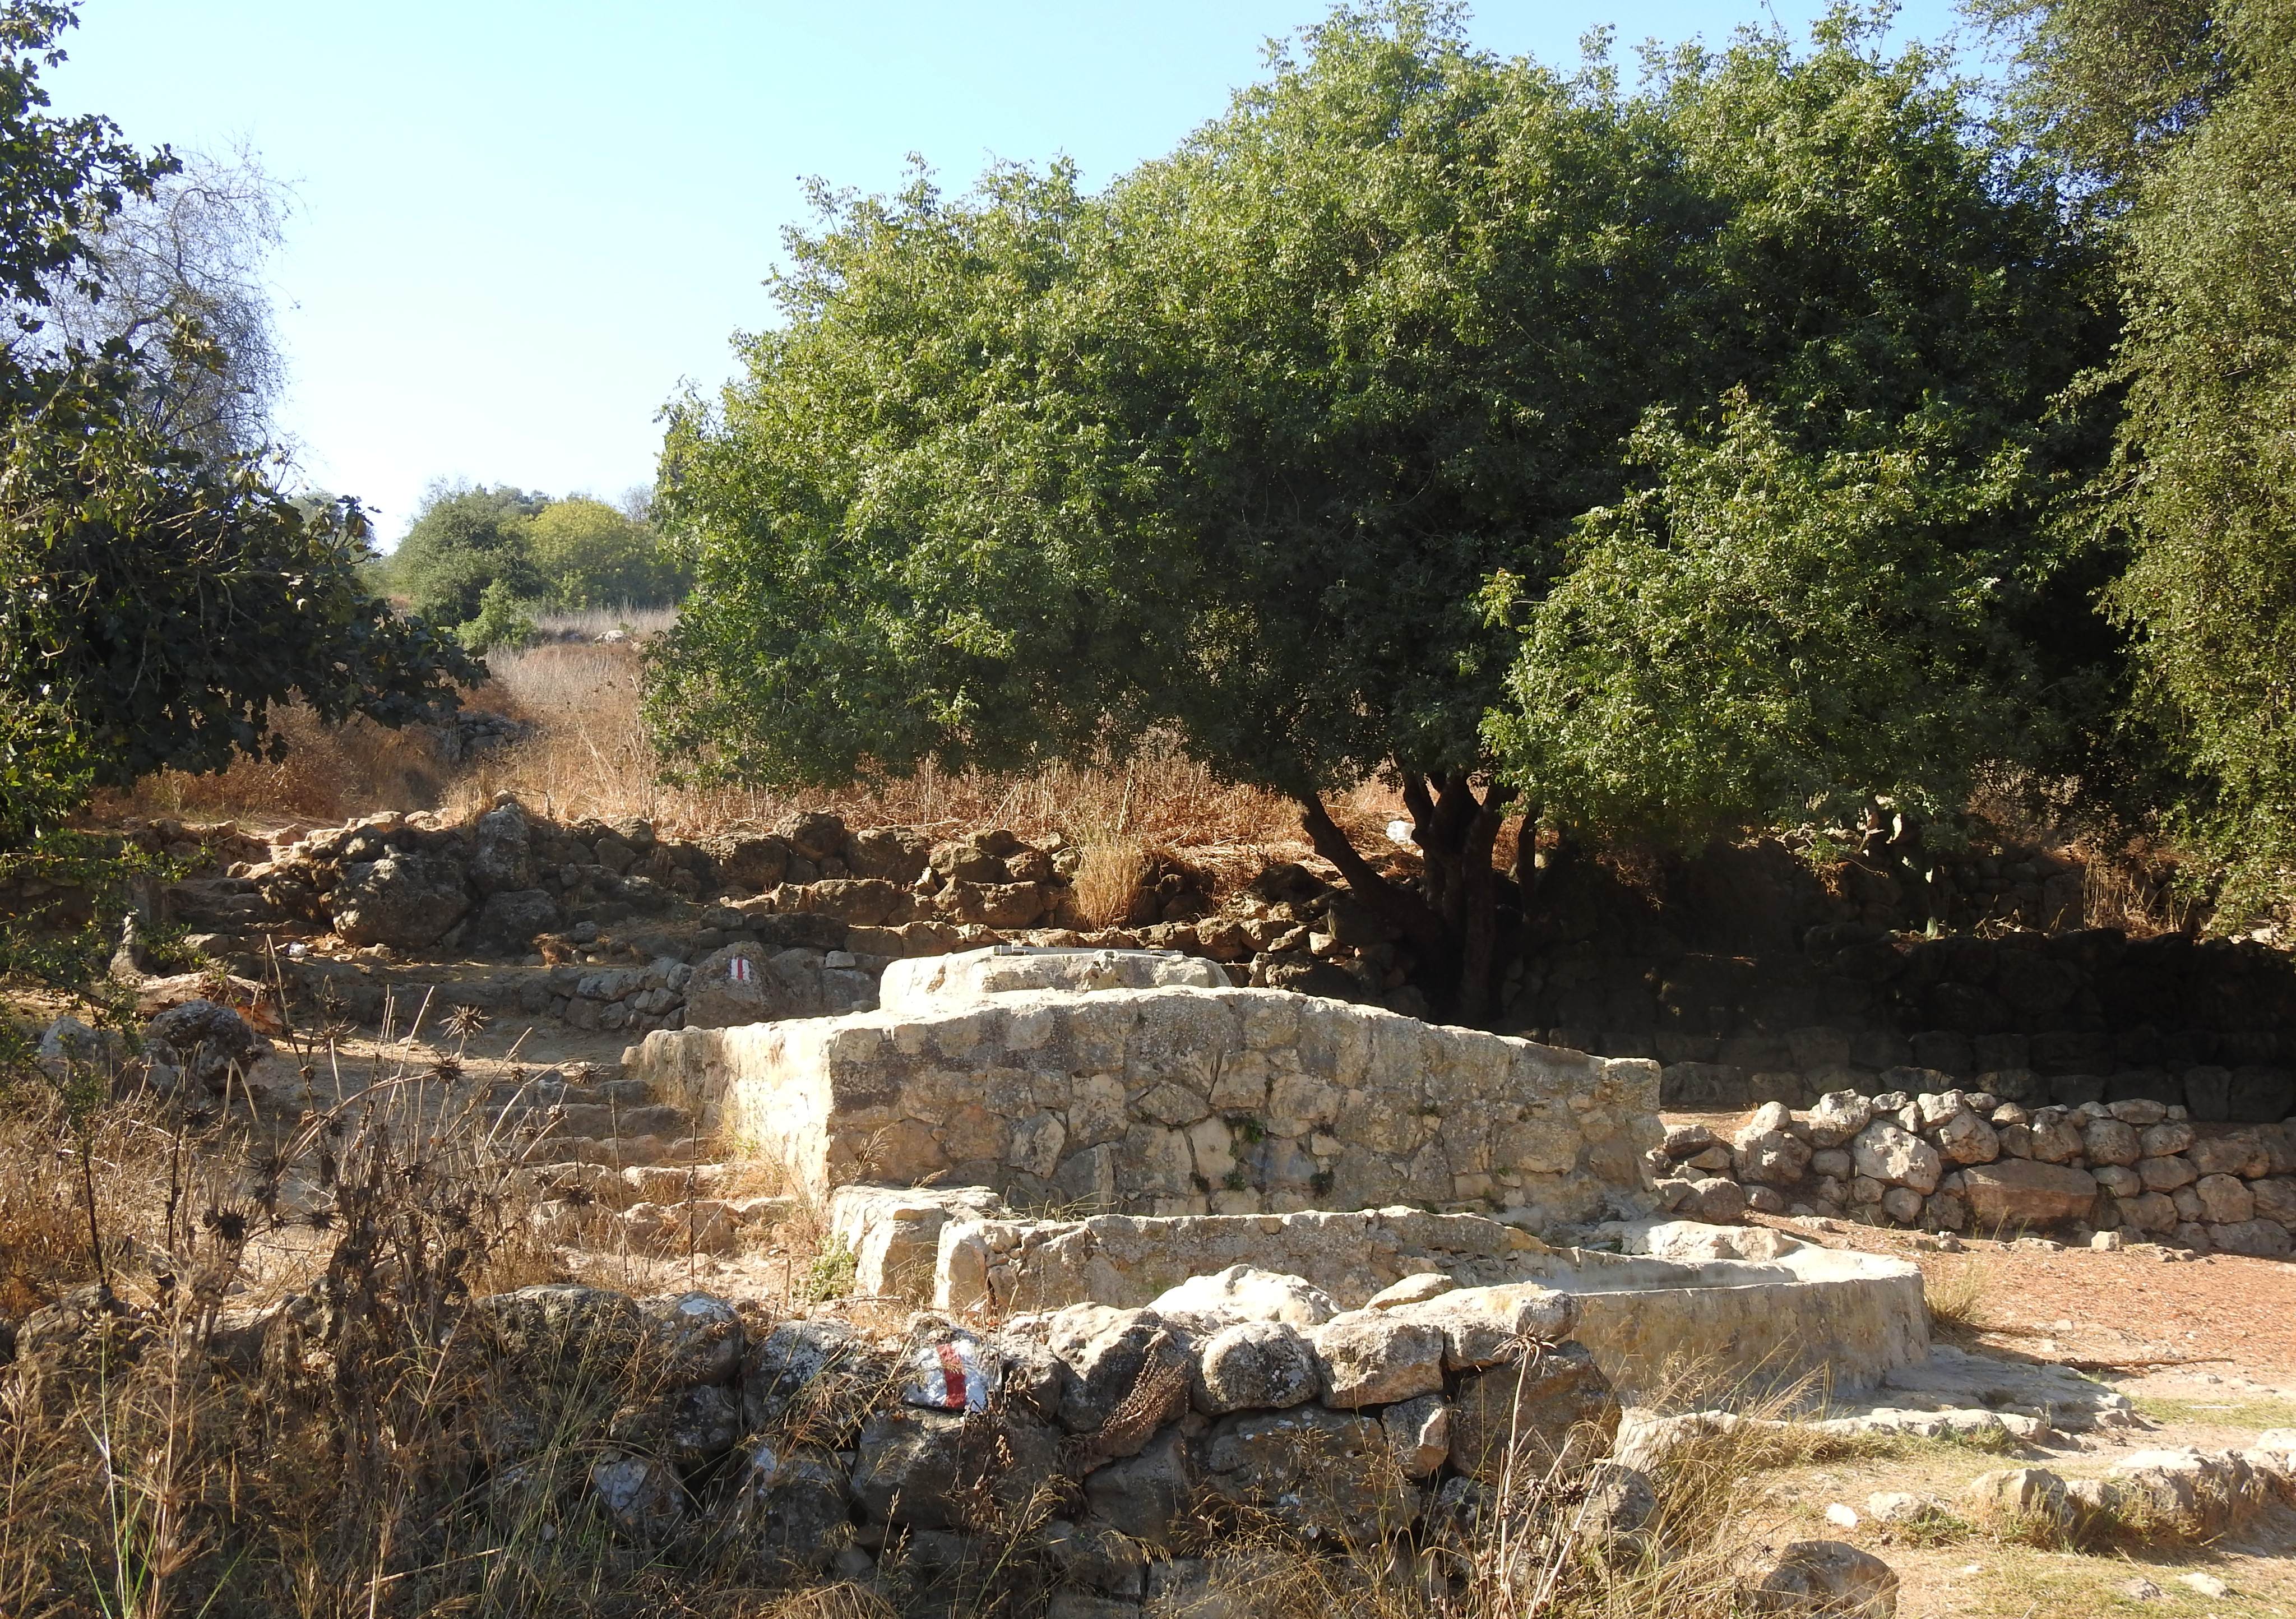 The springs of Ein Hod